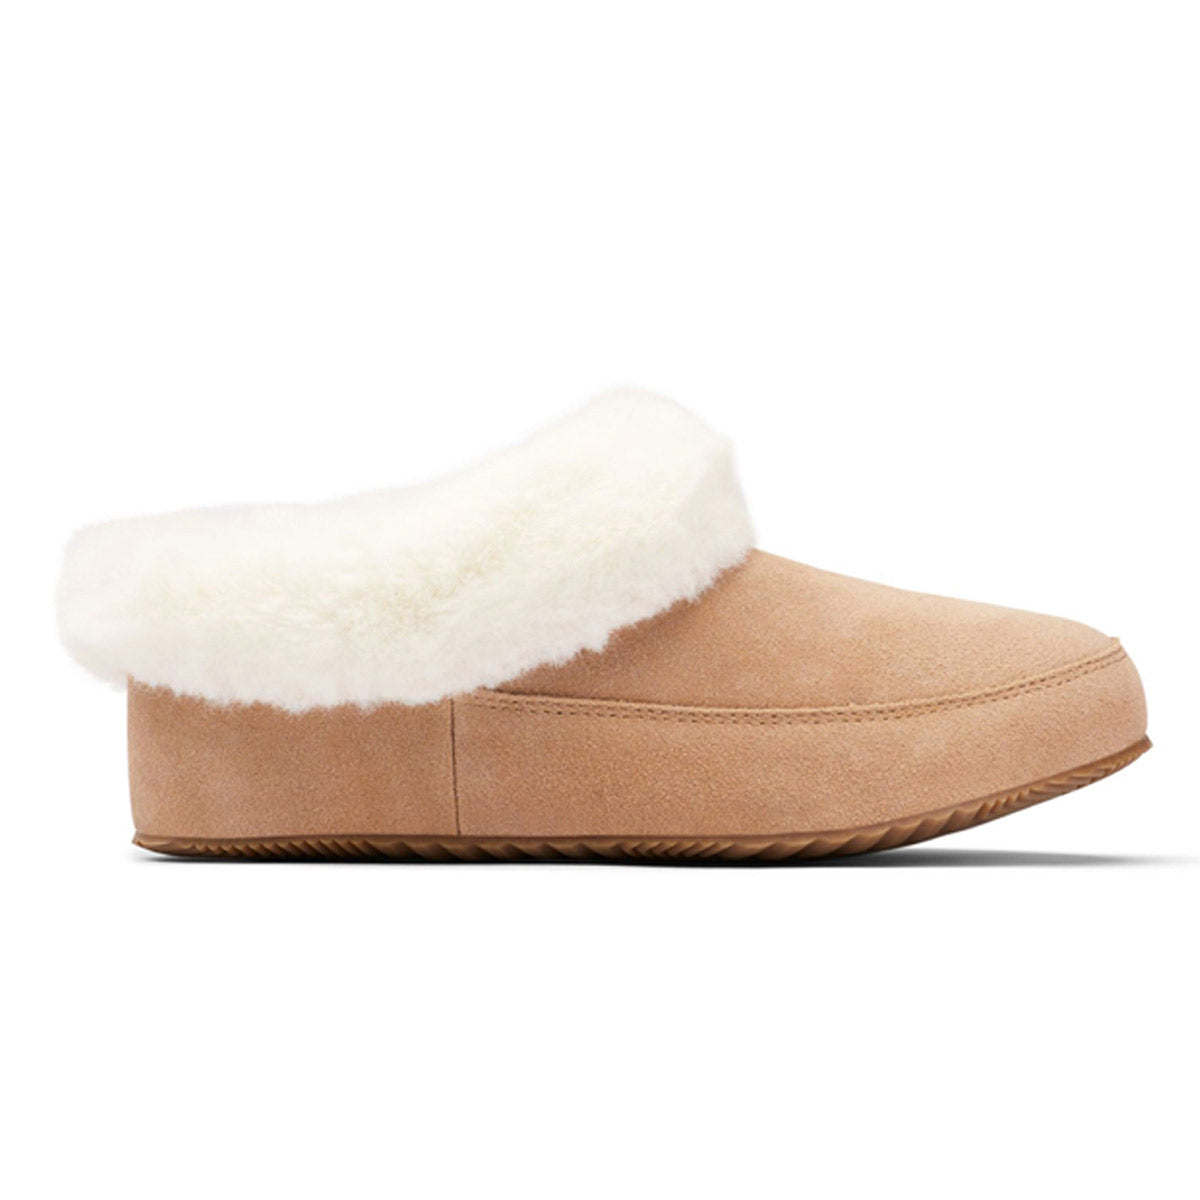 A single tan Sorel Go Coffee Run Tawny Buff slipper with white plush faux fur lining and a brown rubber sole.